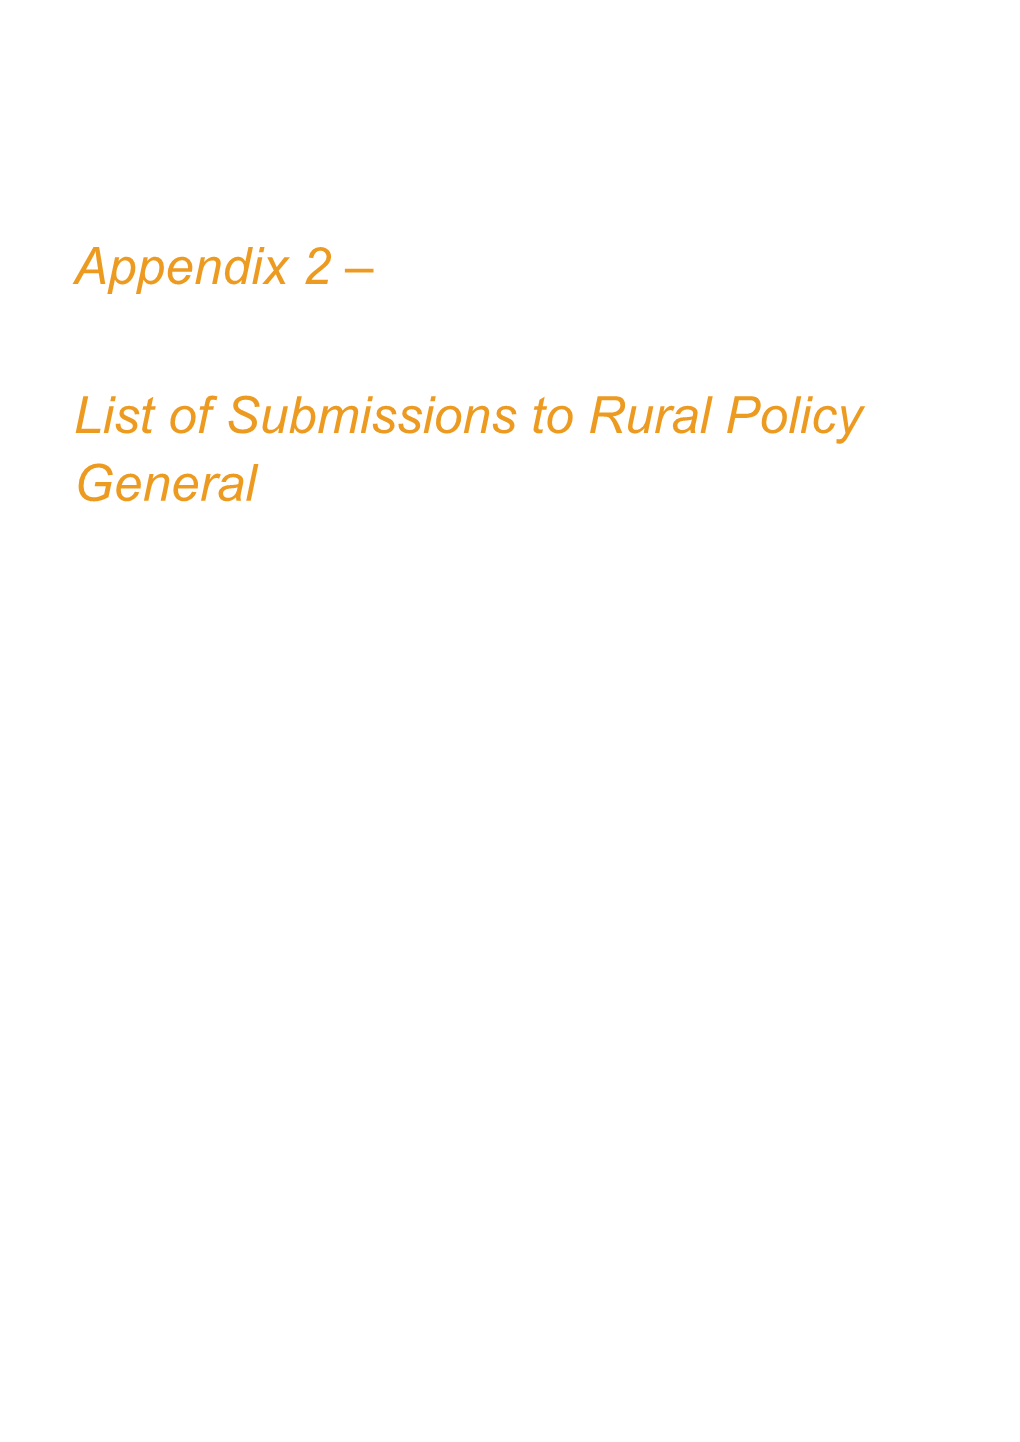 Appendix 2 – List of Submissions to Rural Policy General